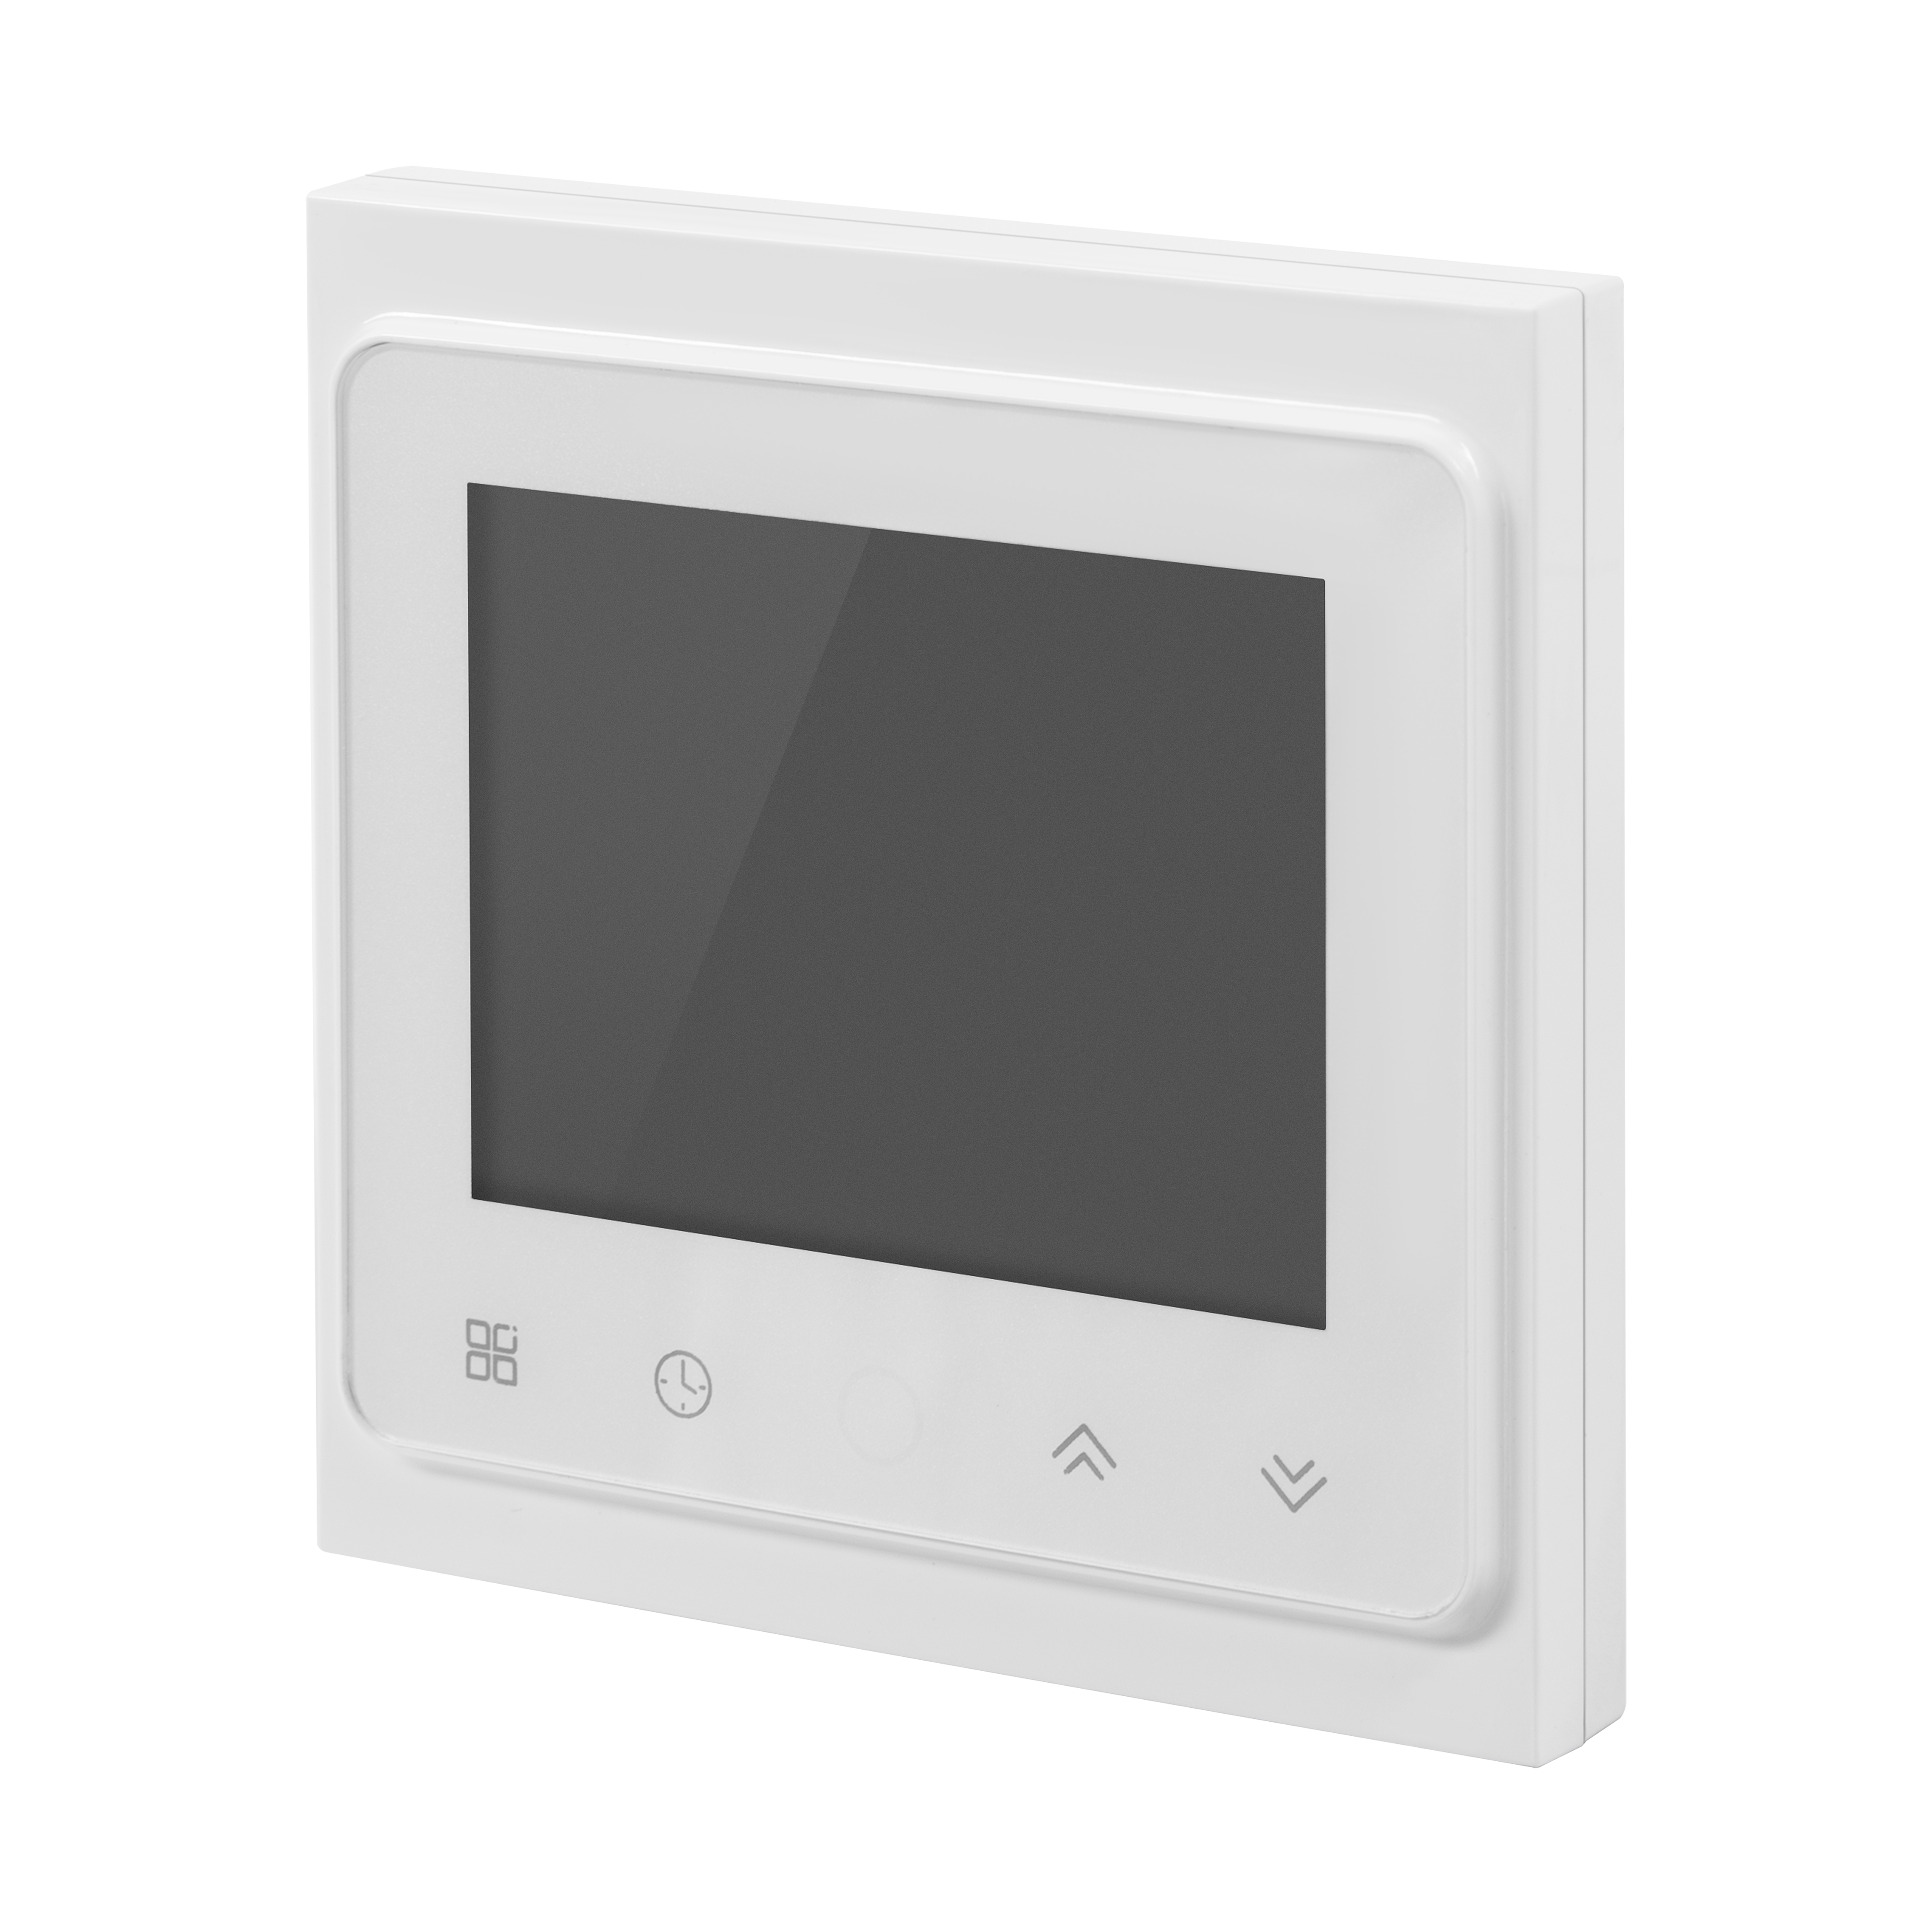 Tervix Pro Line WiFi Thermostat (114331)